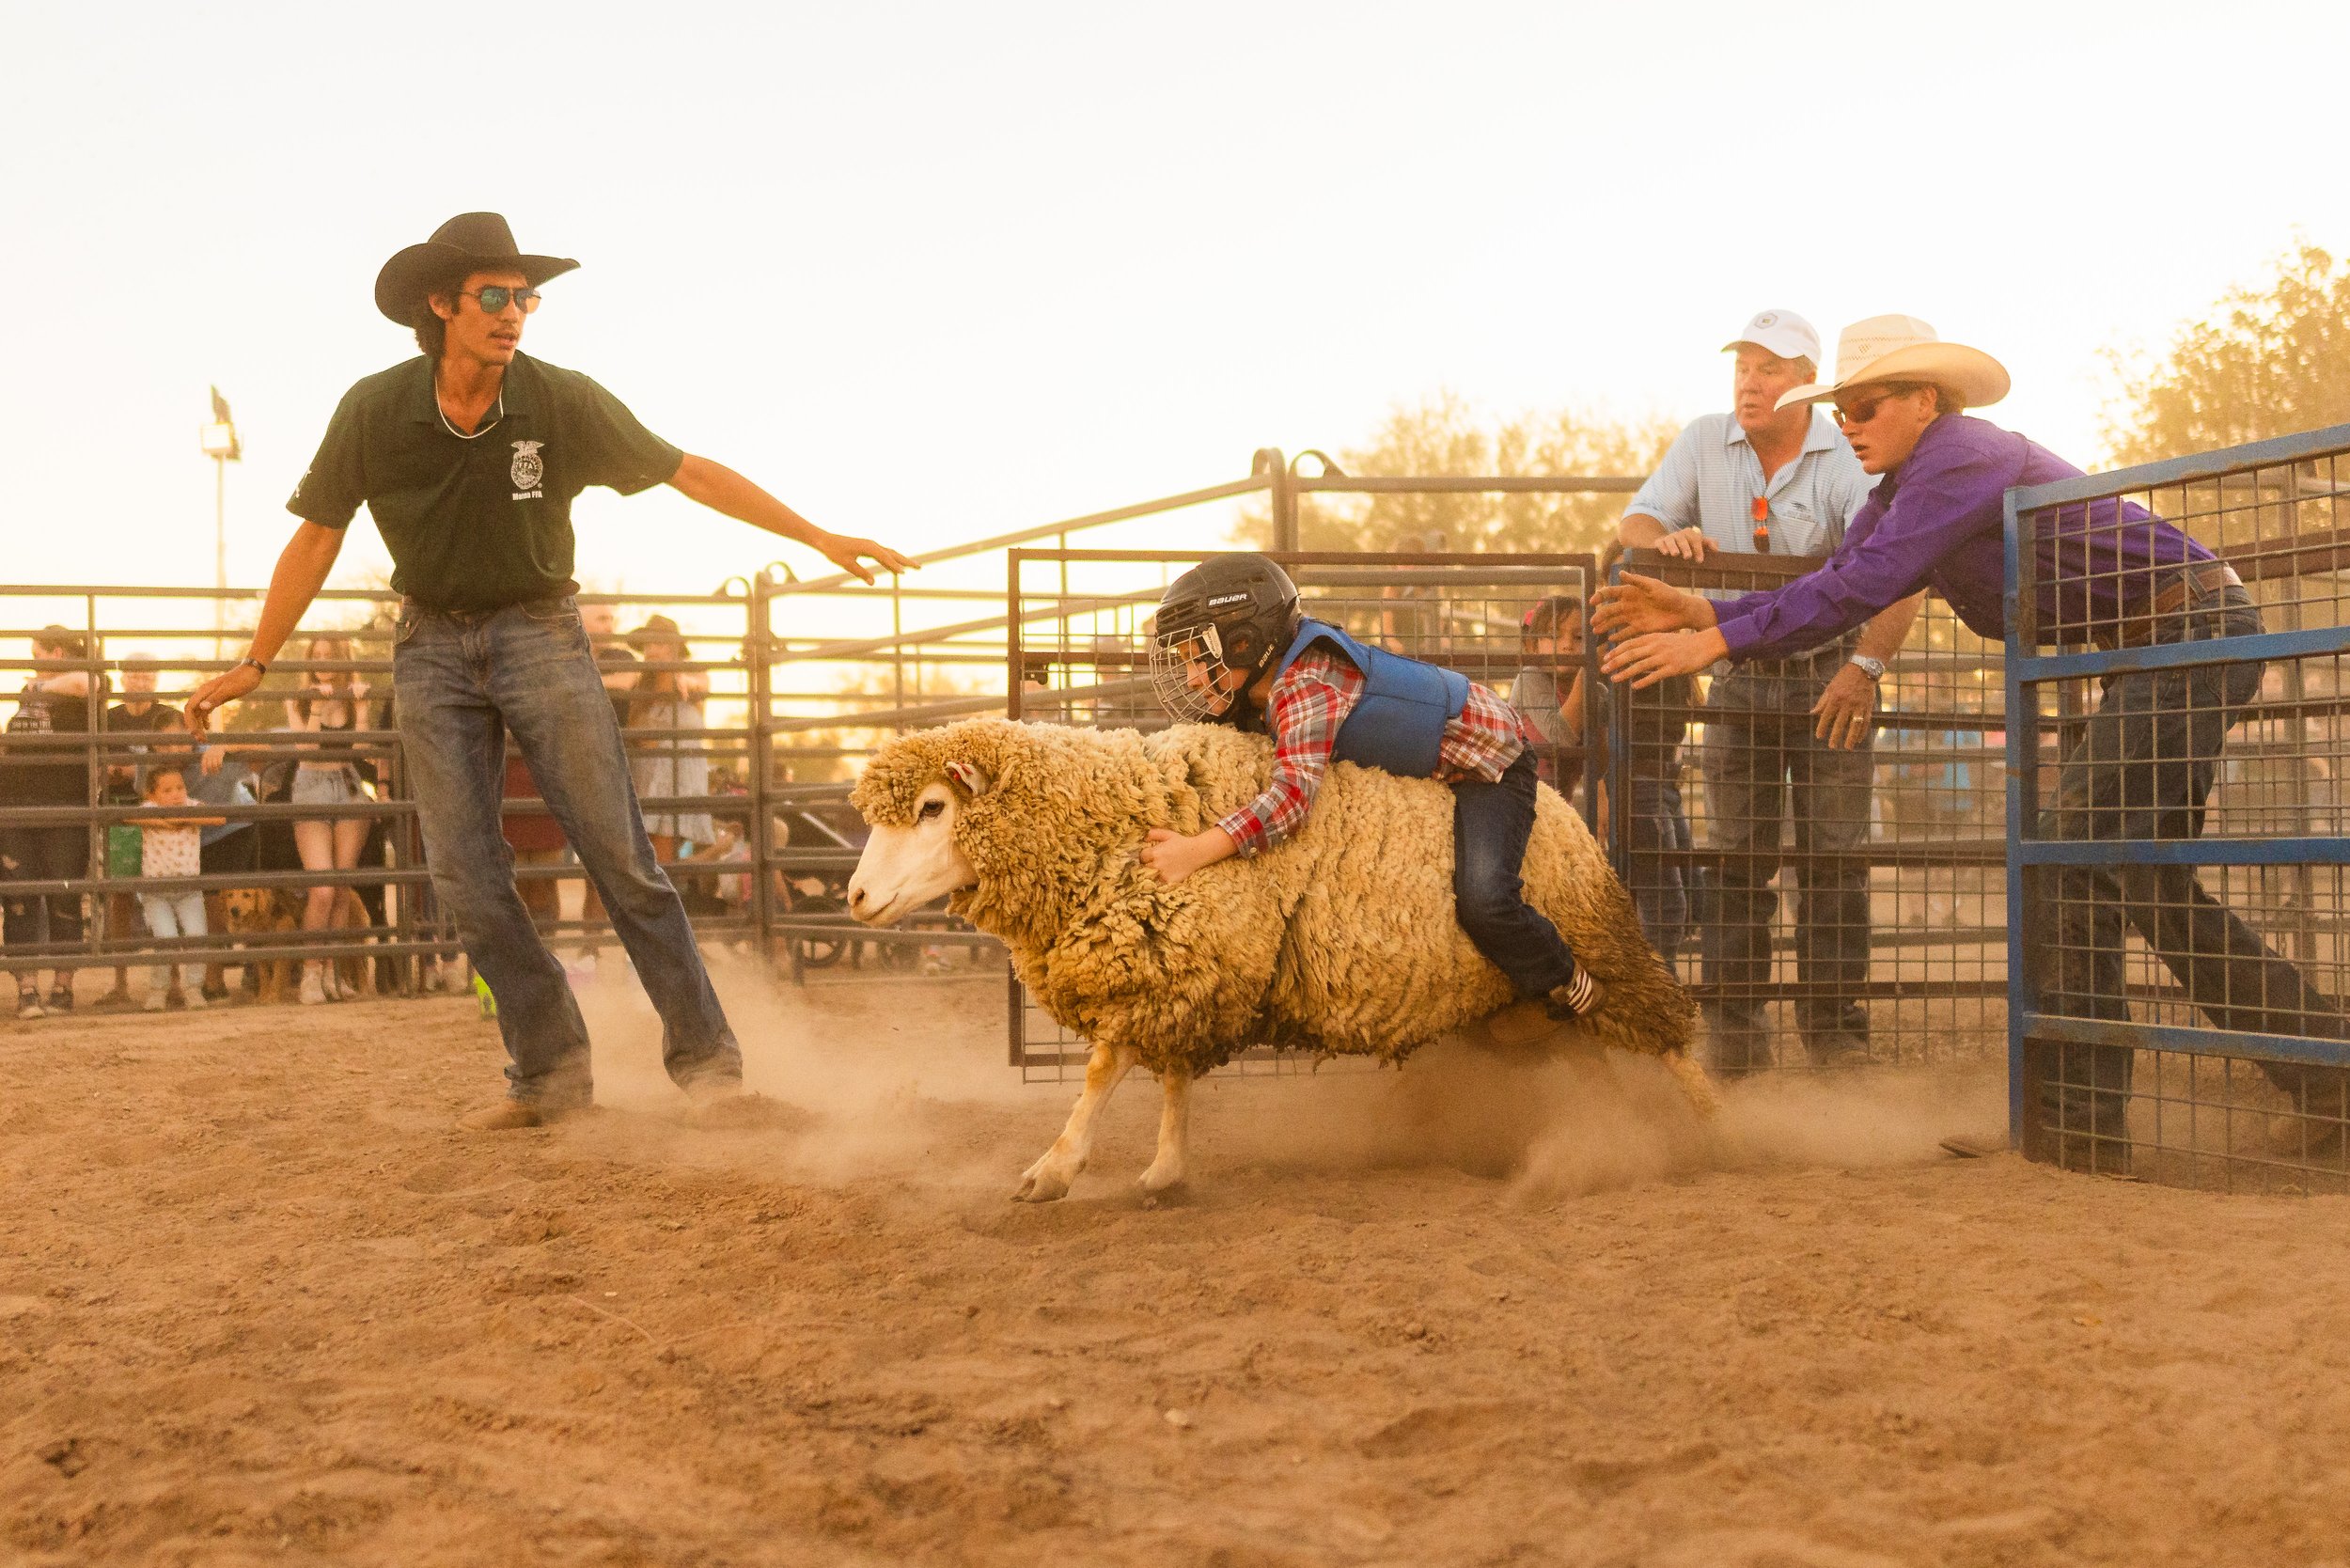  Mutton busting competitor 